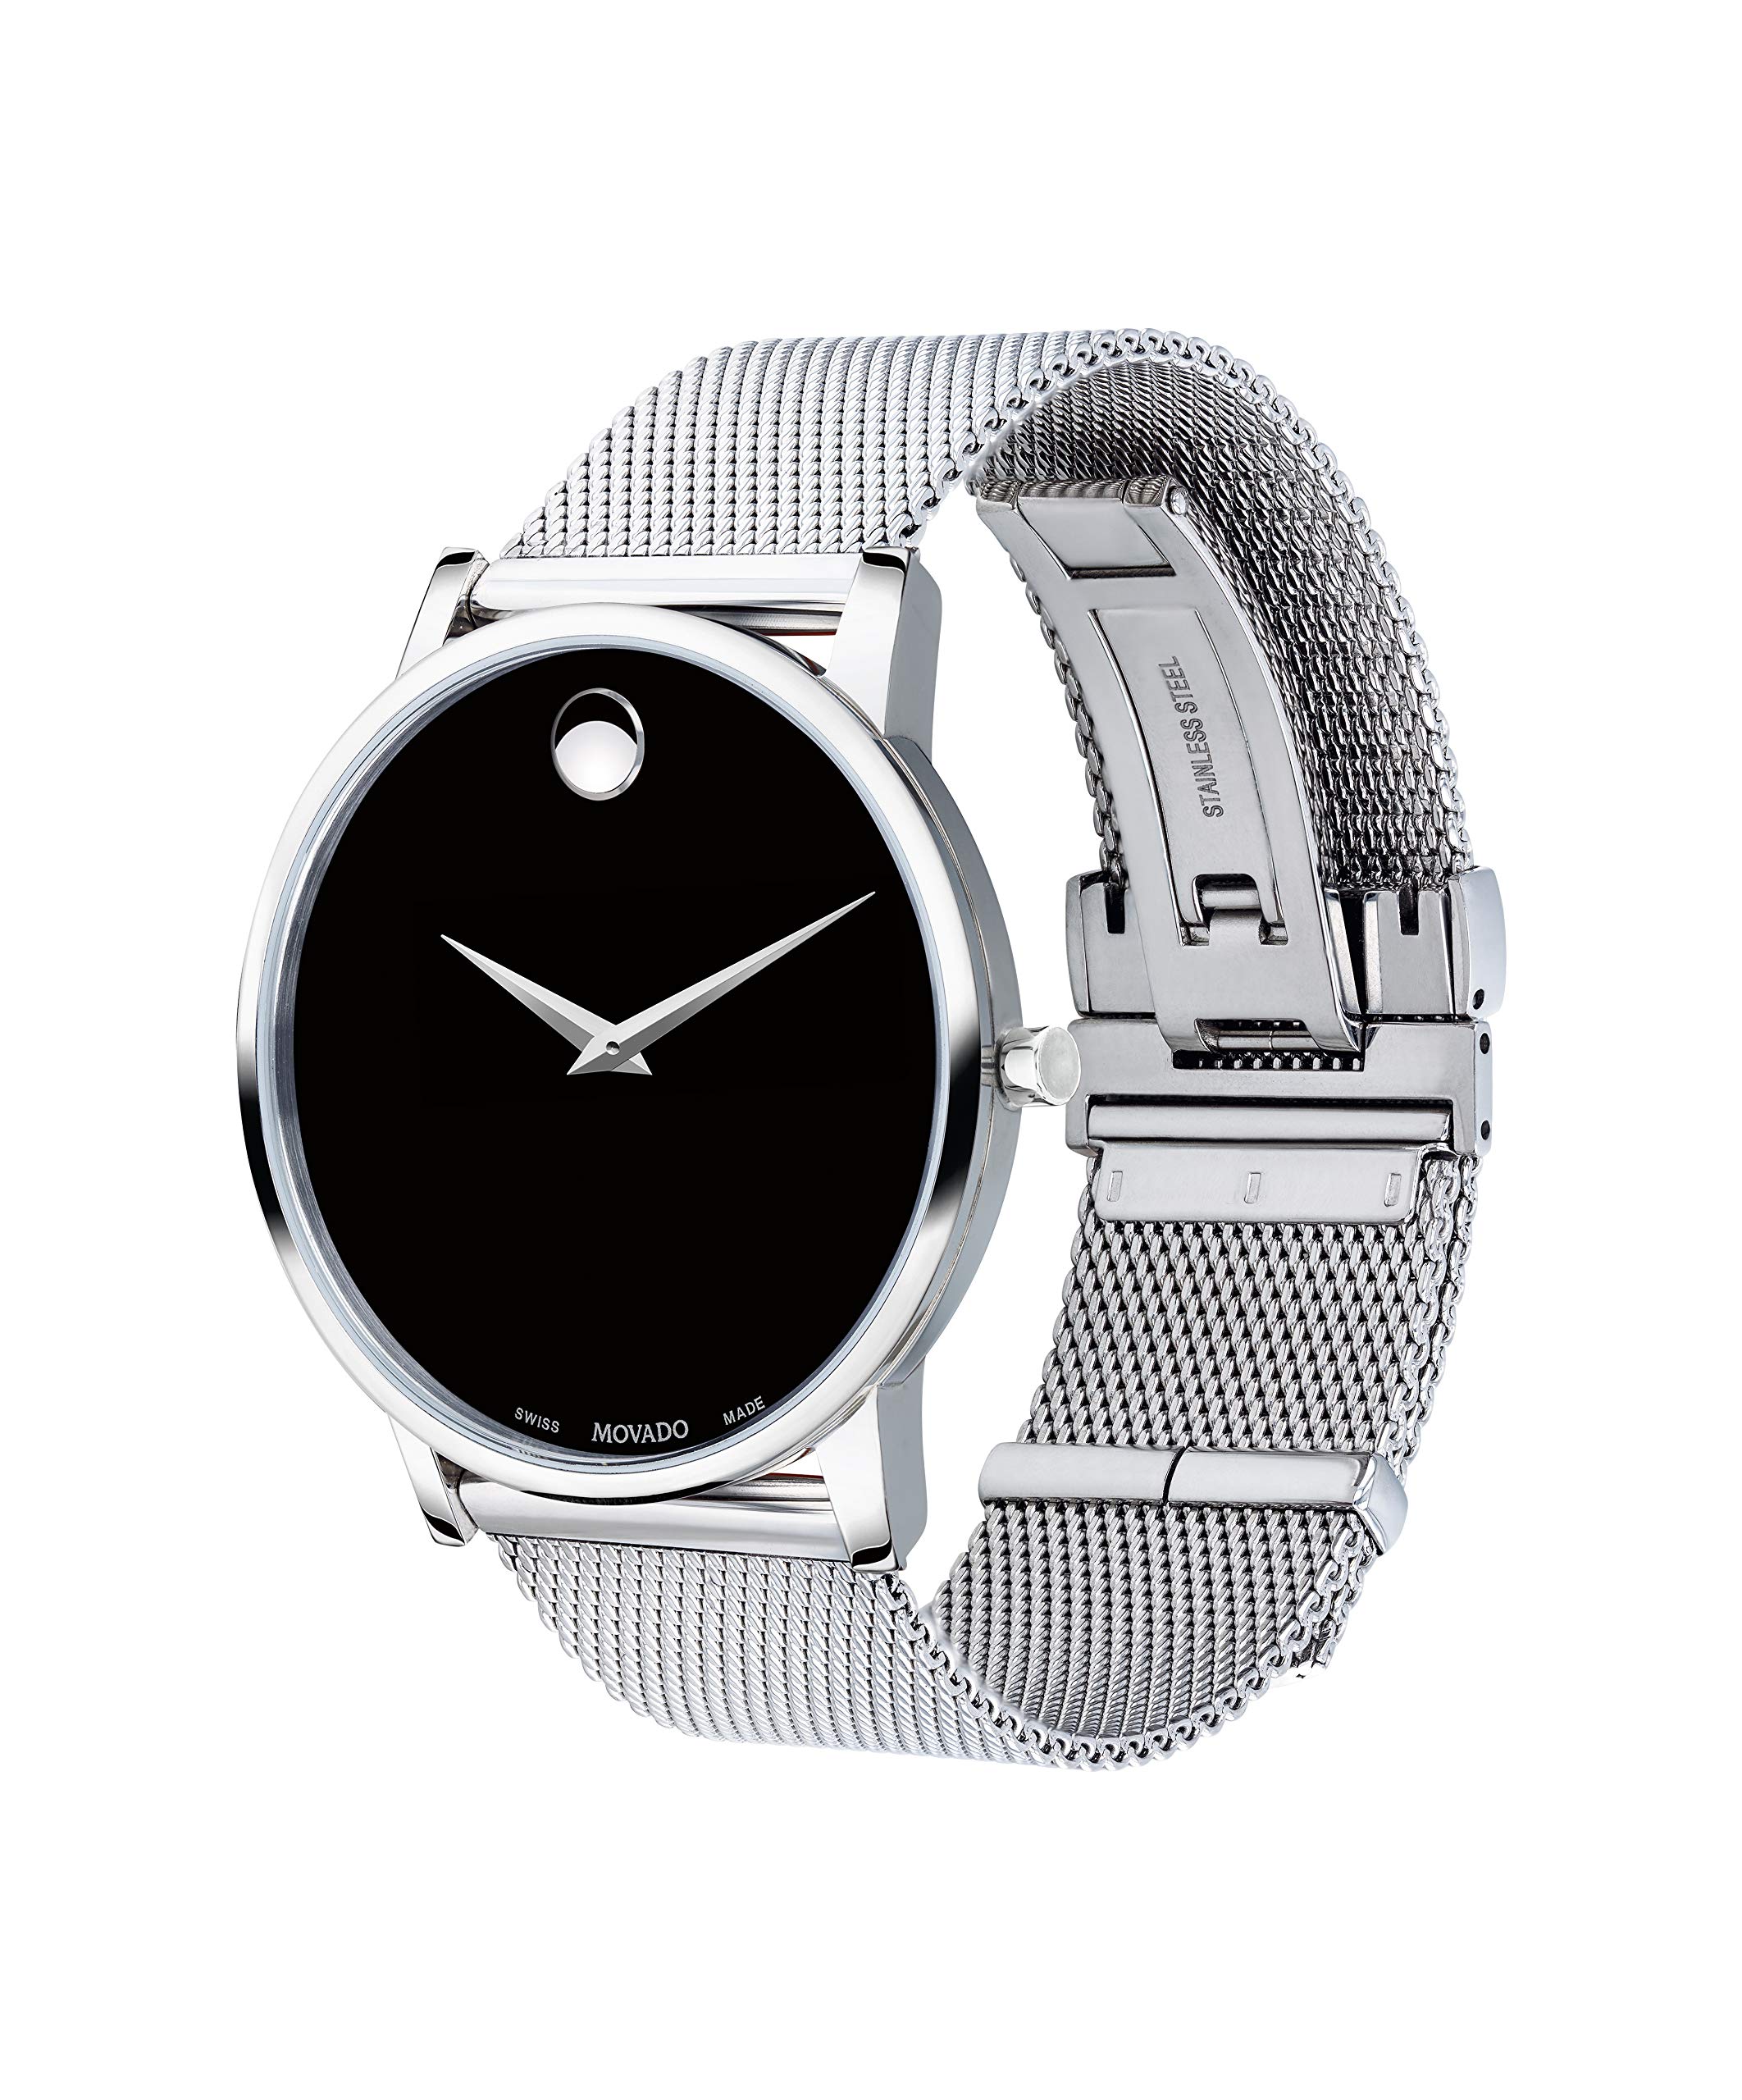 Movado Men's Museum Stainless Steel Watch with Concave Dot Museum Dial, Black/Silver (Model 607219)